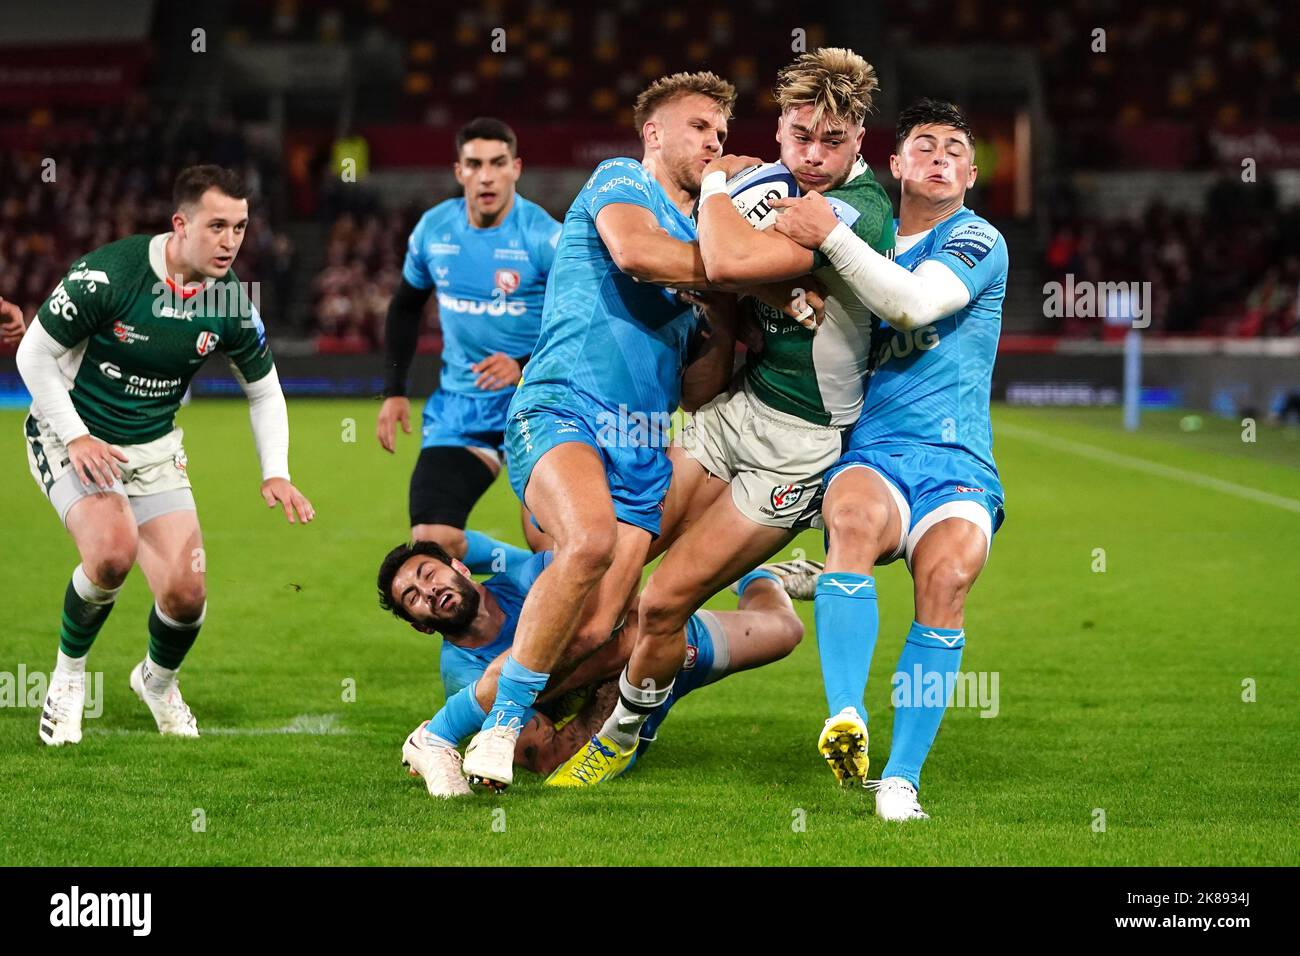 London Irish's Ollie Hassell-Collins is tackled by Gloucester Rugby's Giorgi Kveseldze during the Gallagher Premiership match at the Gtech Community Stadium, London. Picture date: Friday October 21, 2022. Stock Photo